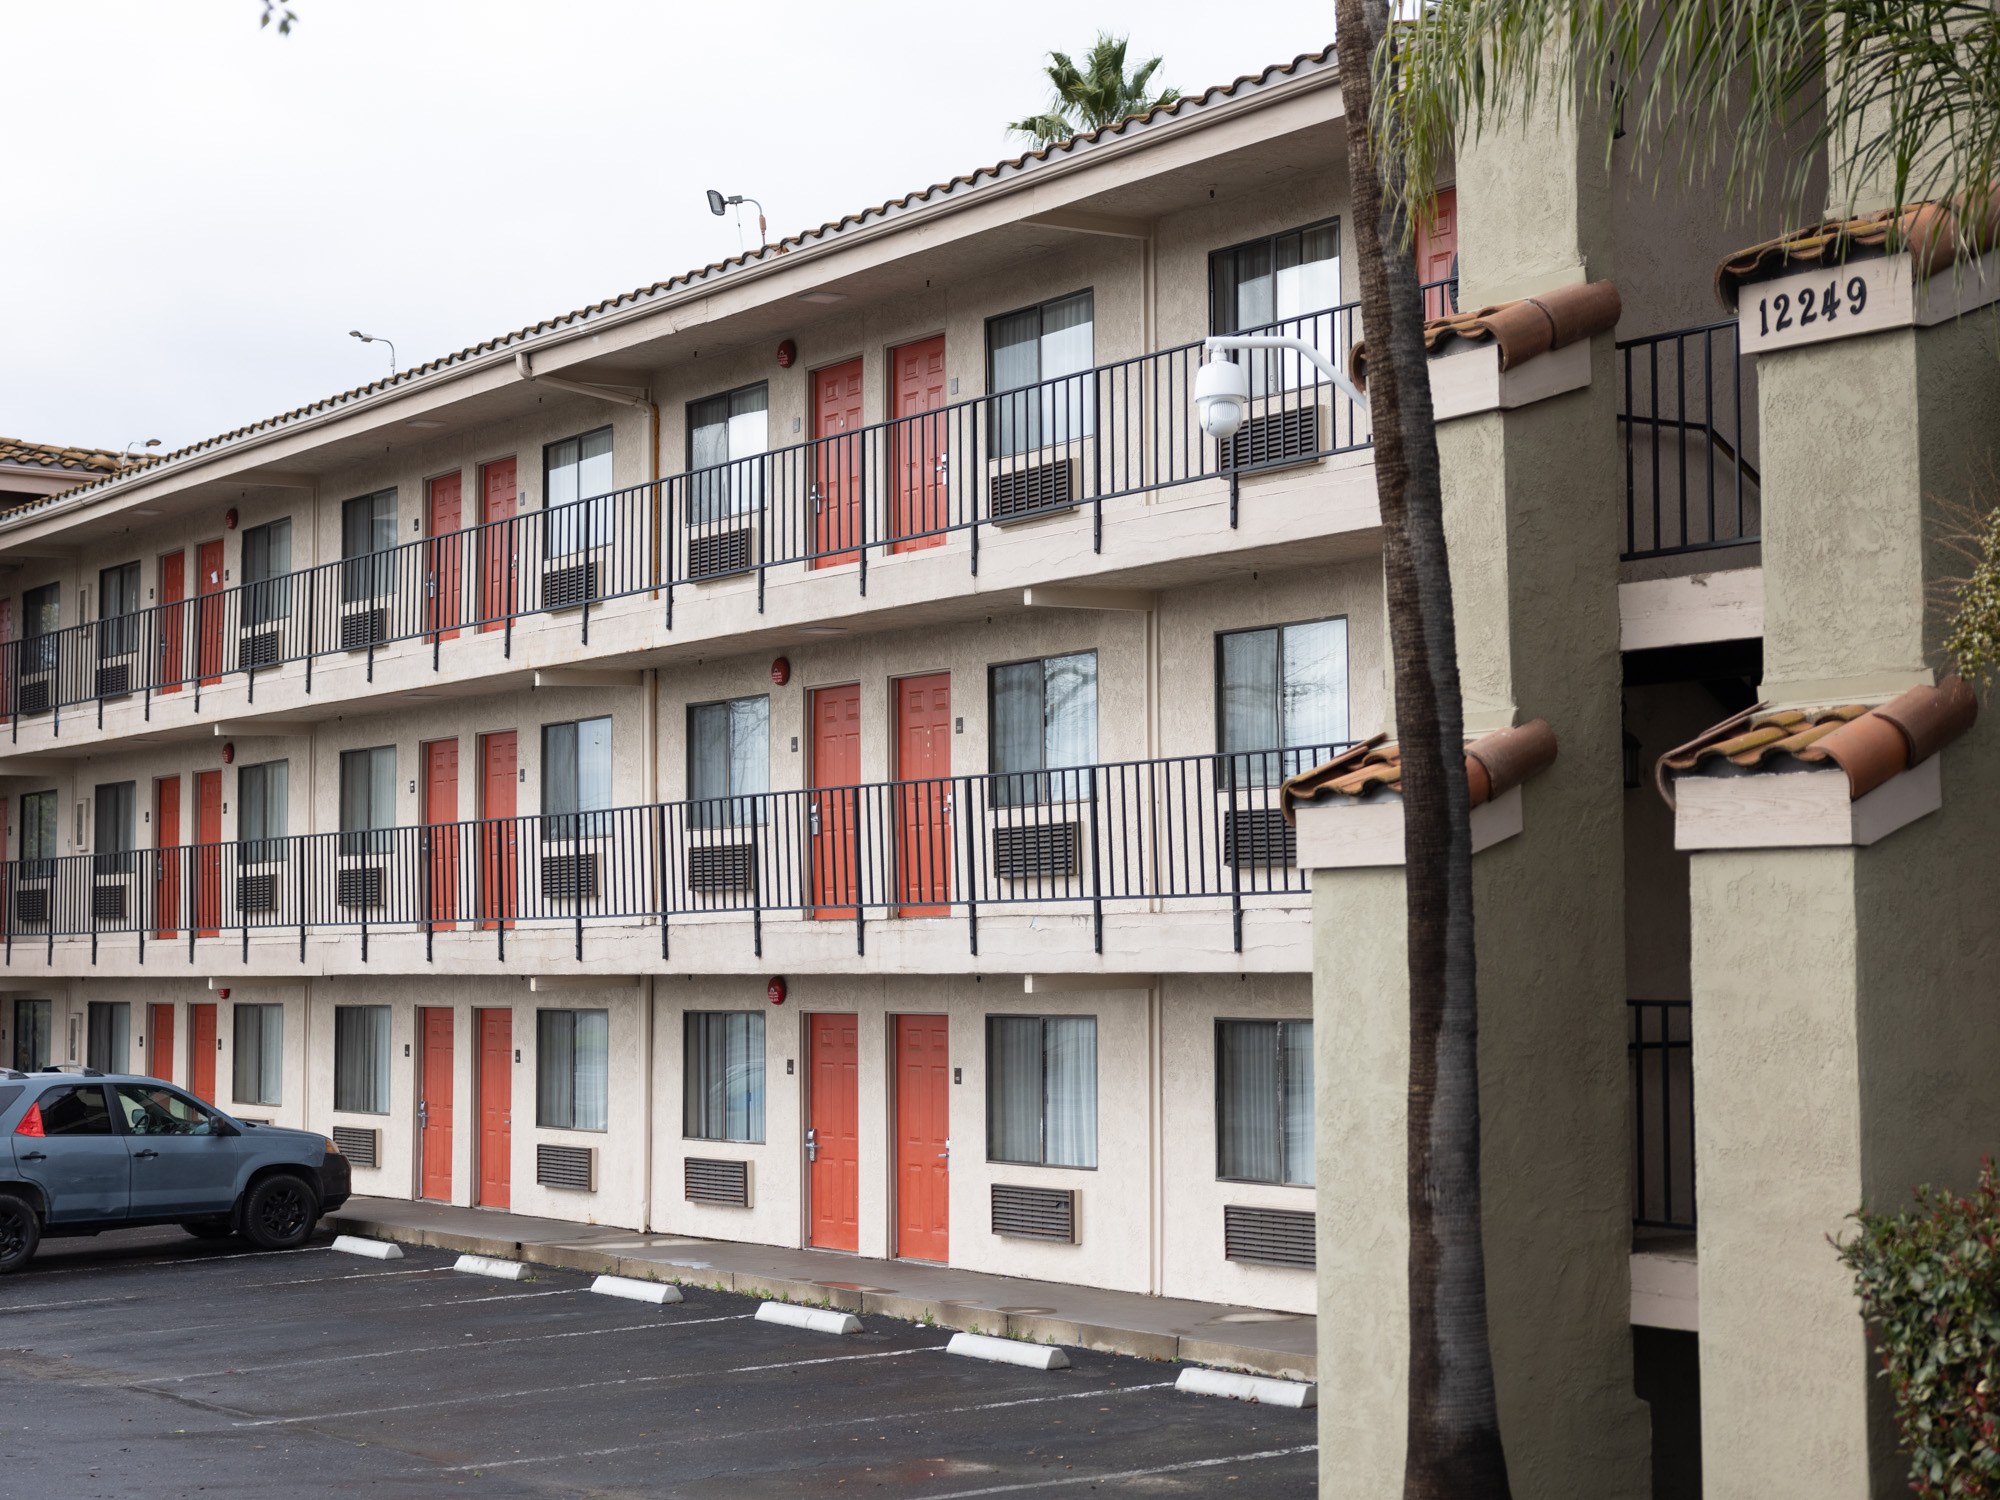 Project Roomkey motels extended for homeless residents 50 years in local news Major holidays this time of year